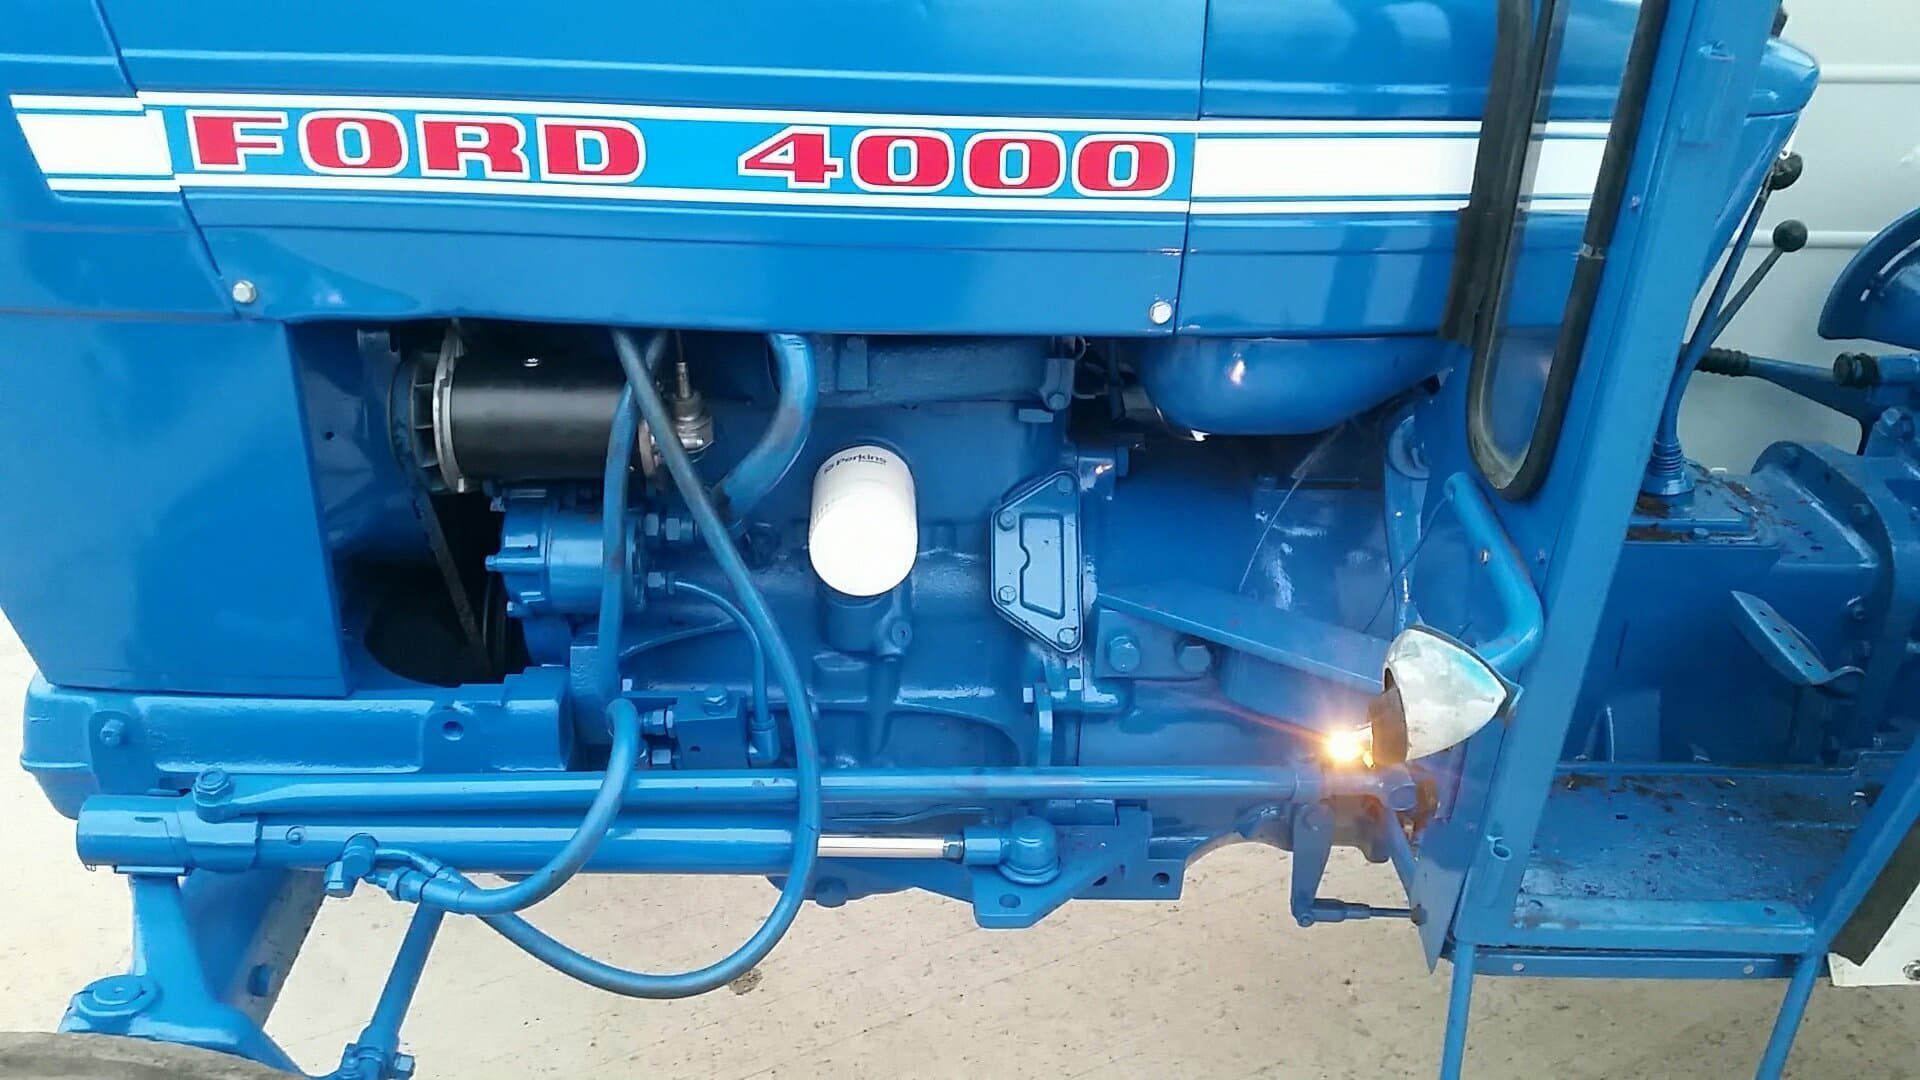 1971 Fully Refurbished Ford 4000 Tractor - Image 9 of 10